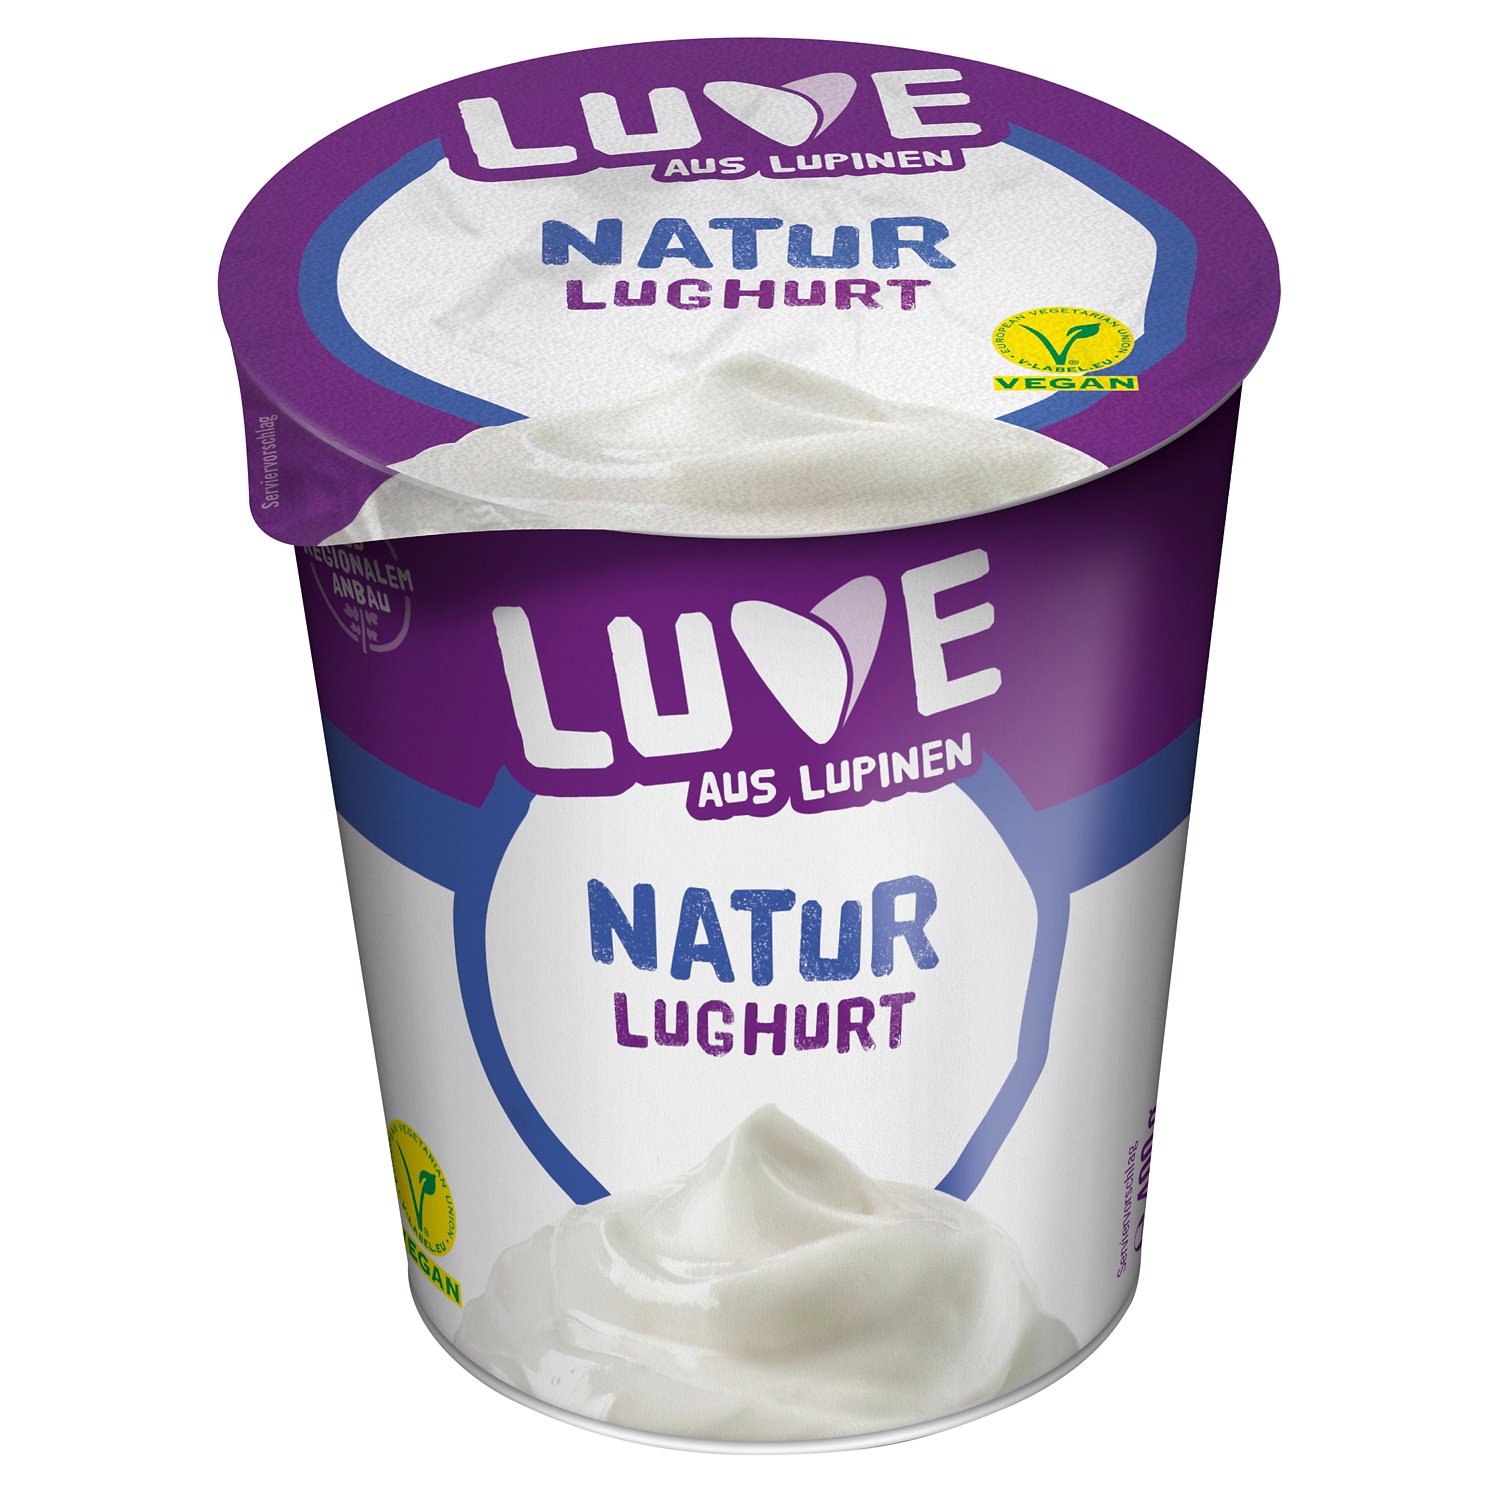 Made with luve Yogourt, nature